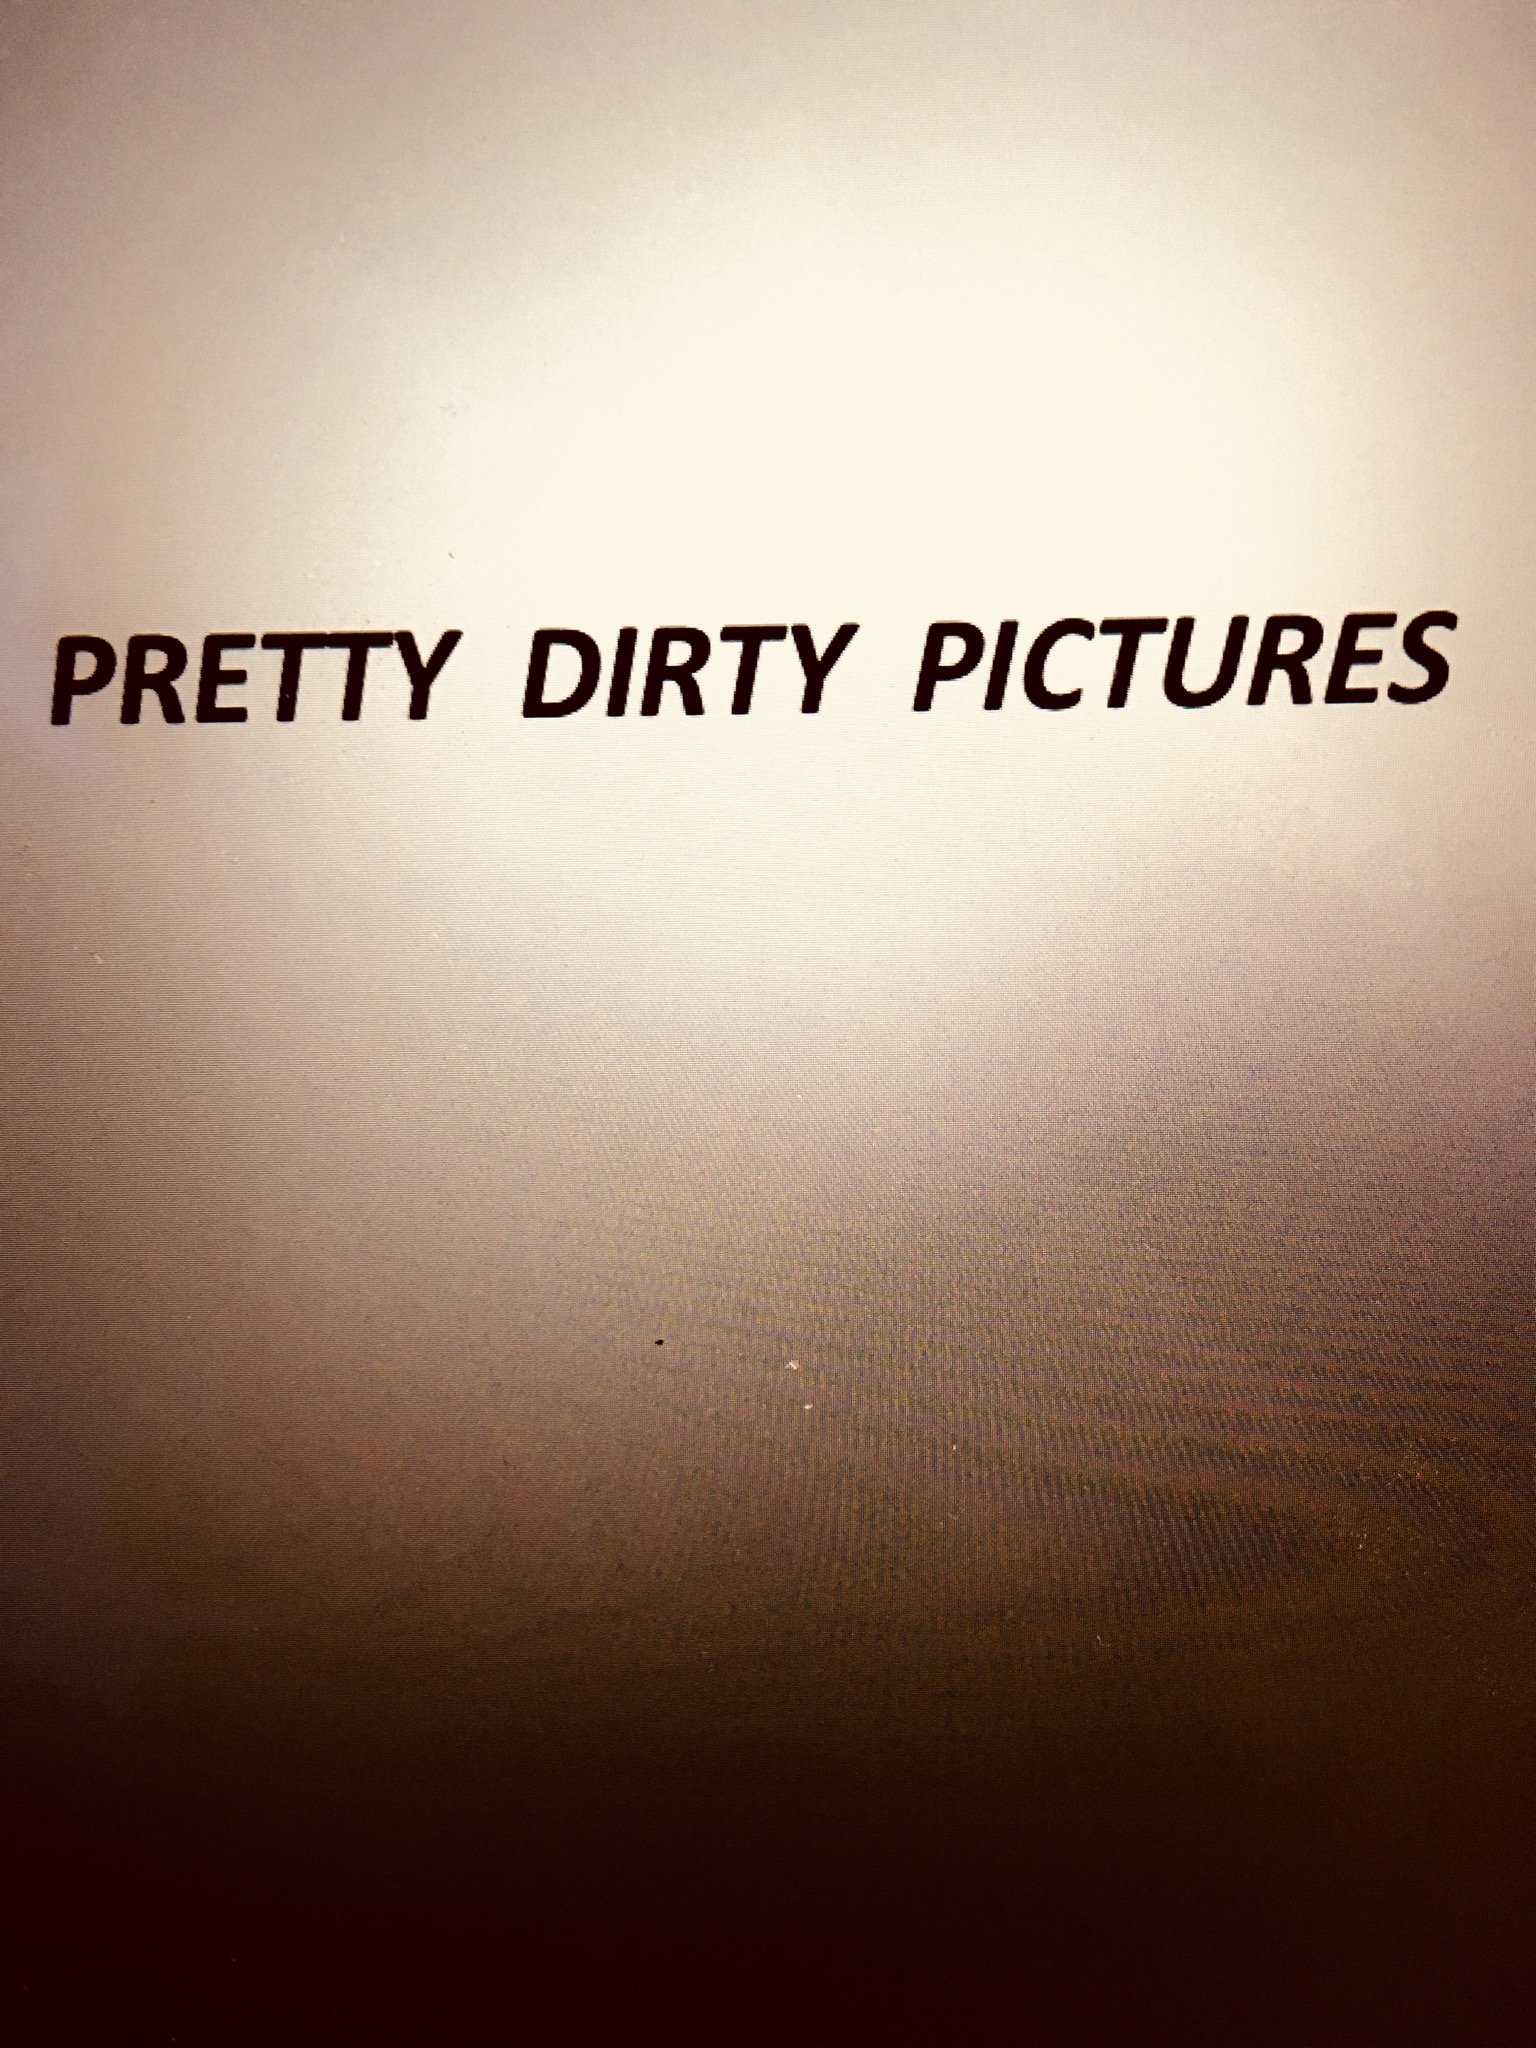 PRETTY DIRTY PICTURES